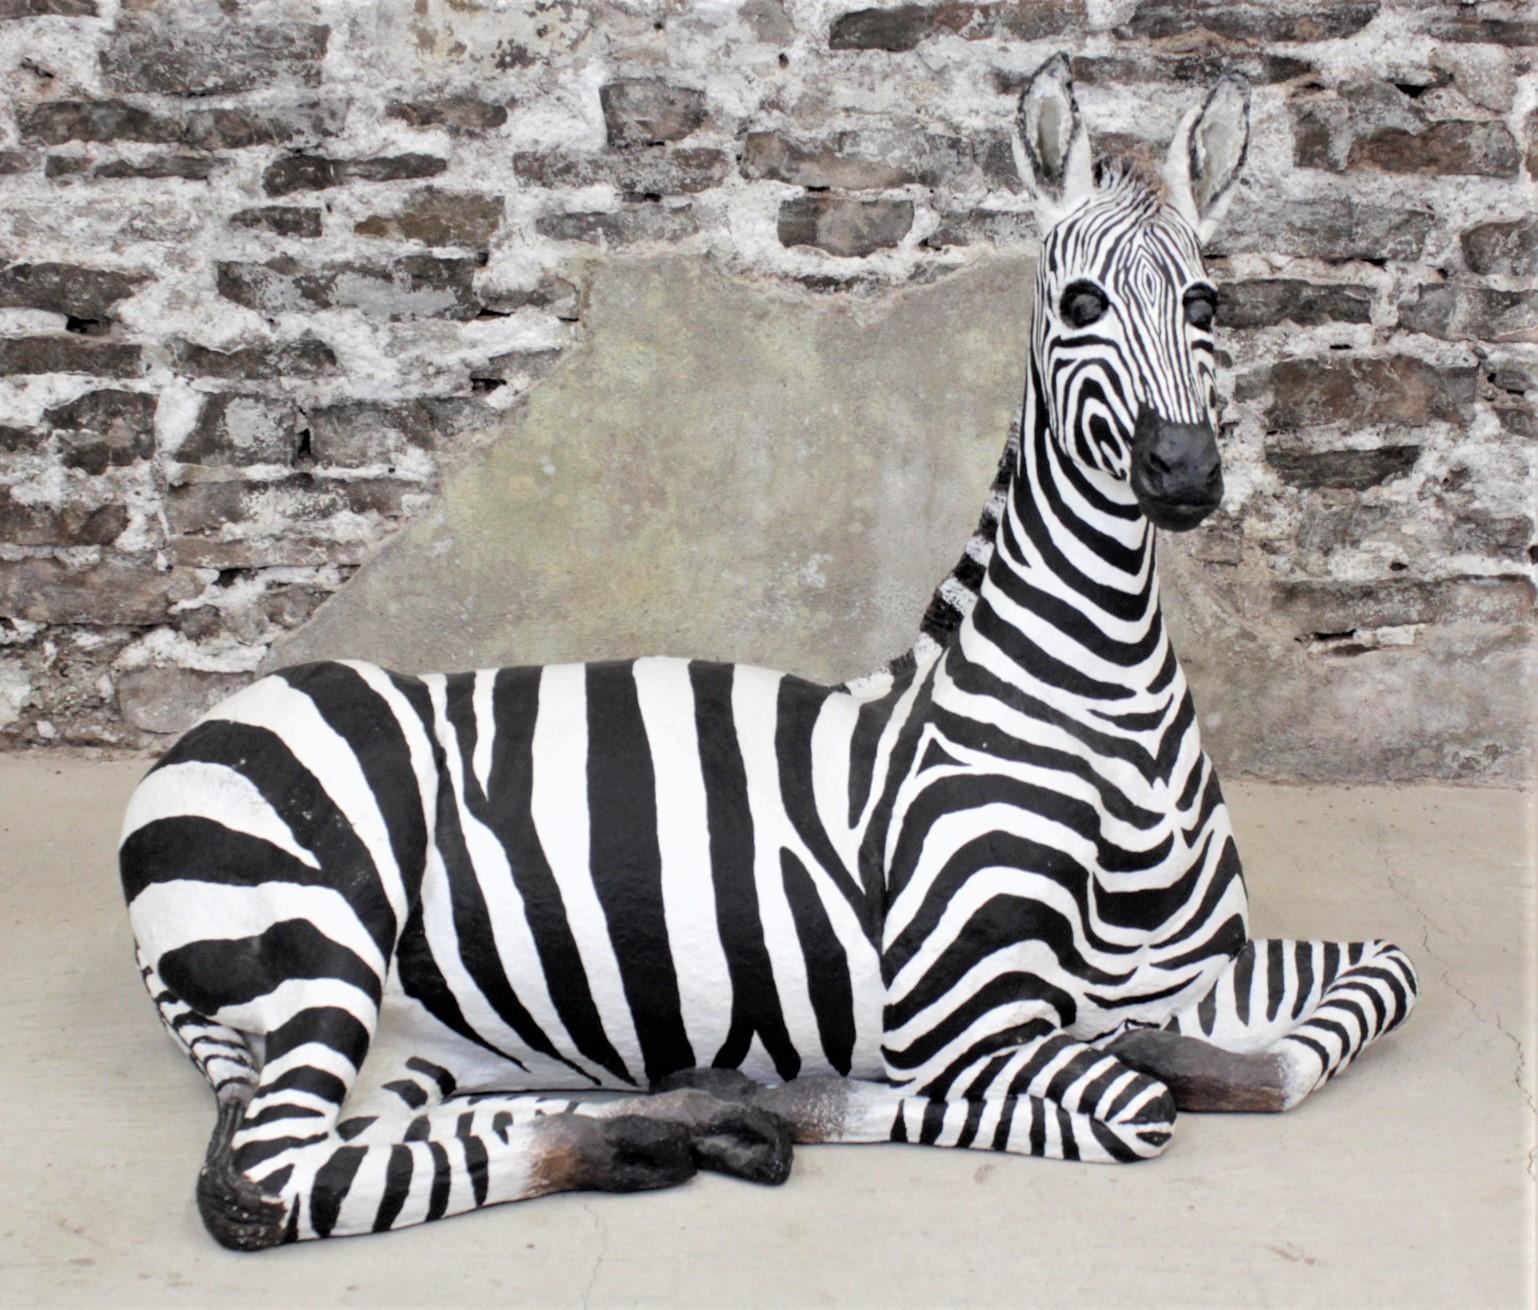 This large and substantial zebra sculpture was made by Monica Oliver, and unknown artist, in 1990 in a modern realistic style. The sculpture appears to be composed of various materials such as paper mache, fiberglass and resin and hand-painted. The